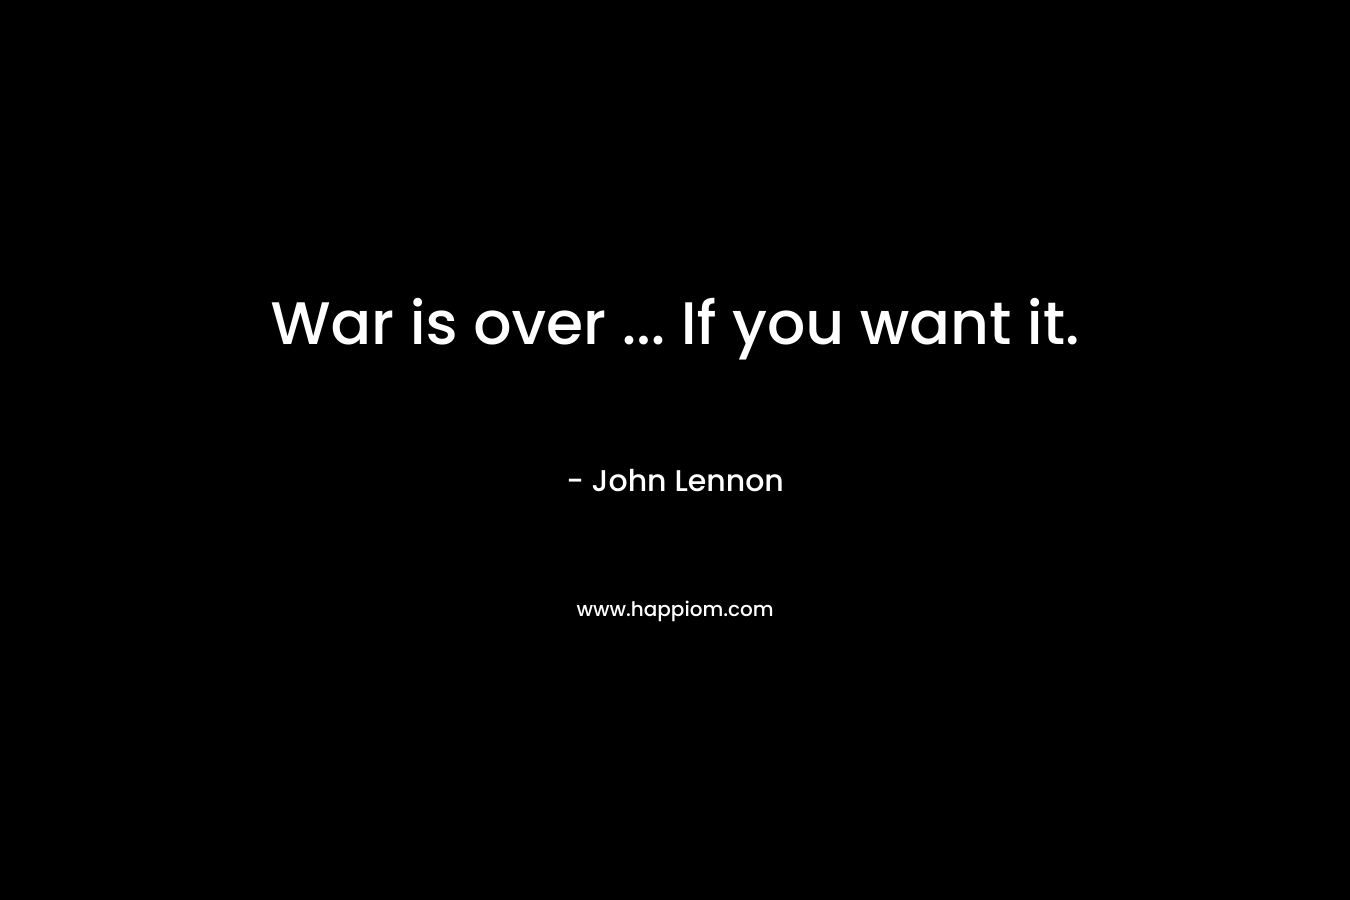 War is over ... If you want it.